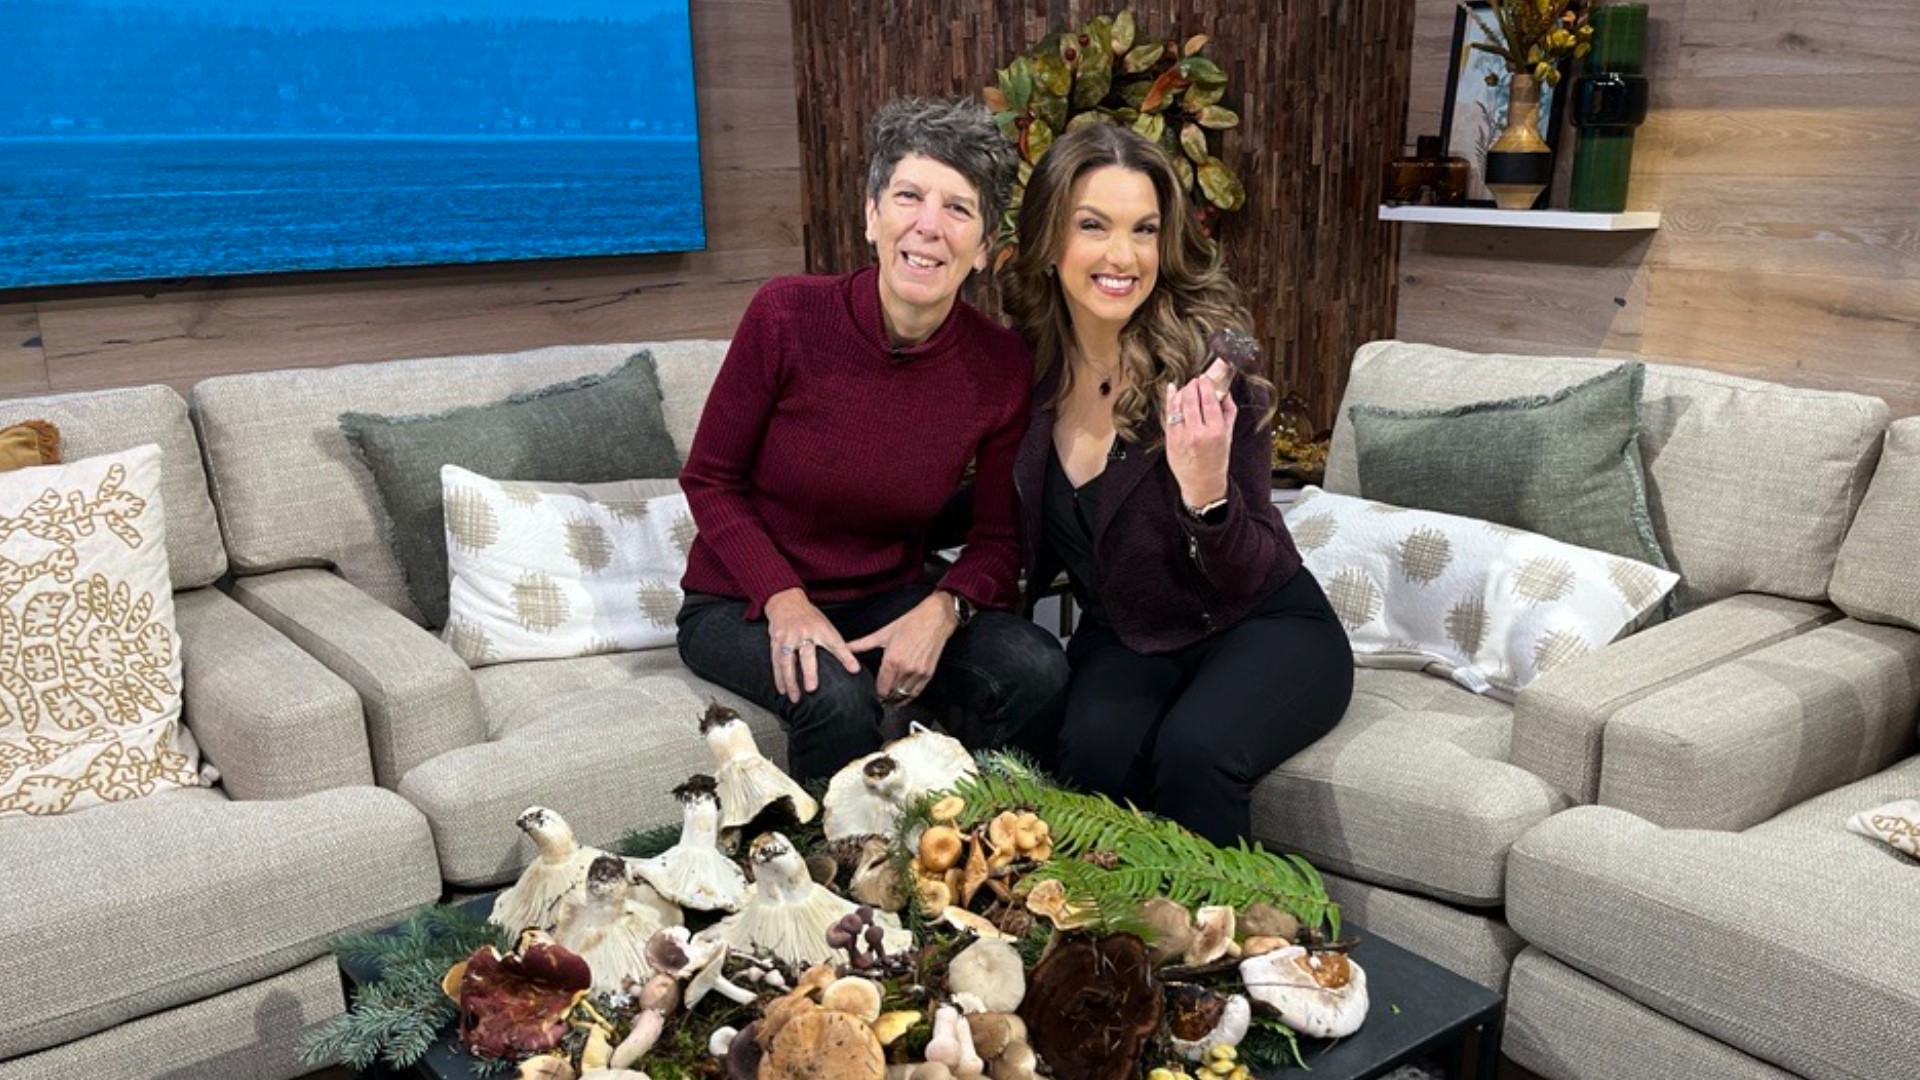 Author of "Meetings with Remarkable Mushrooms," Alison Pouliot talks all about the fascinating world of fungi and their important role in the ecosystem.